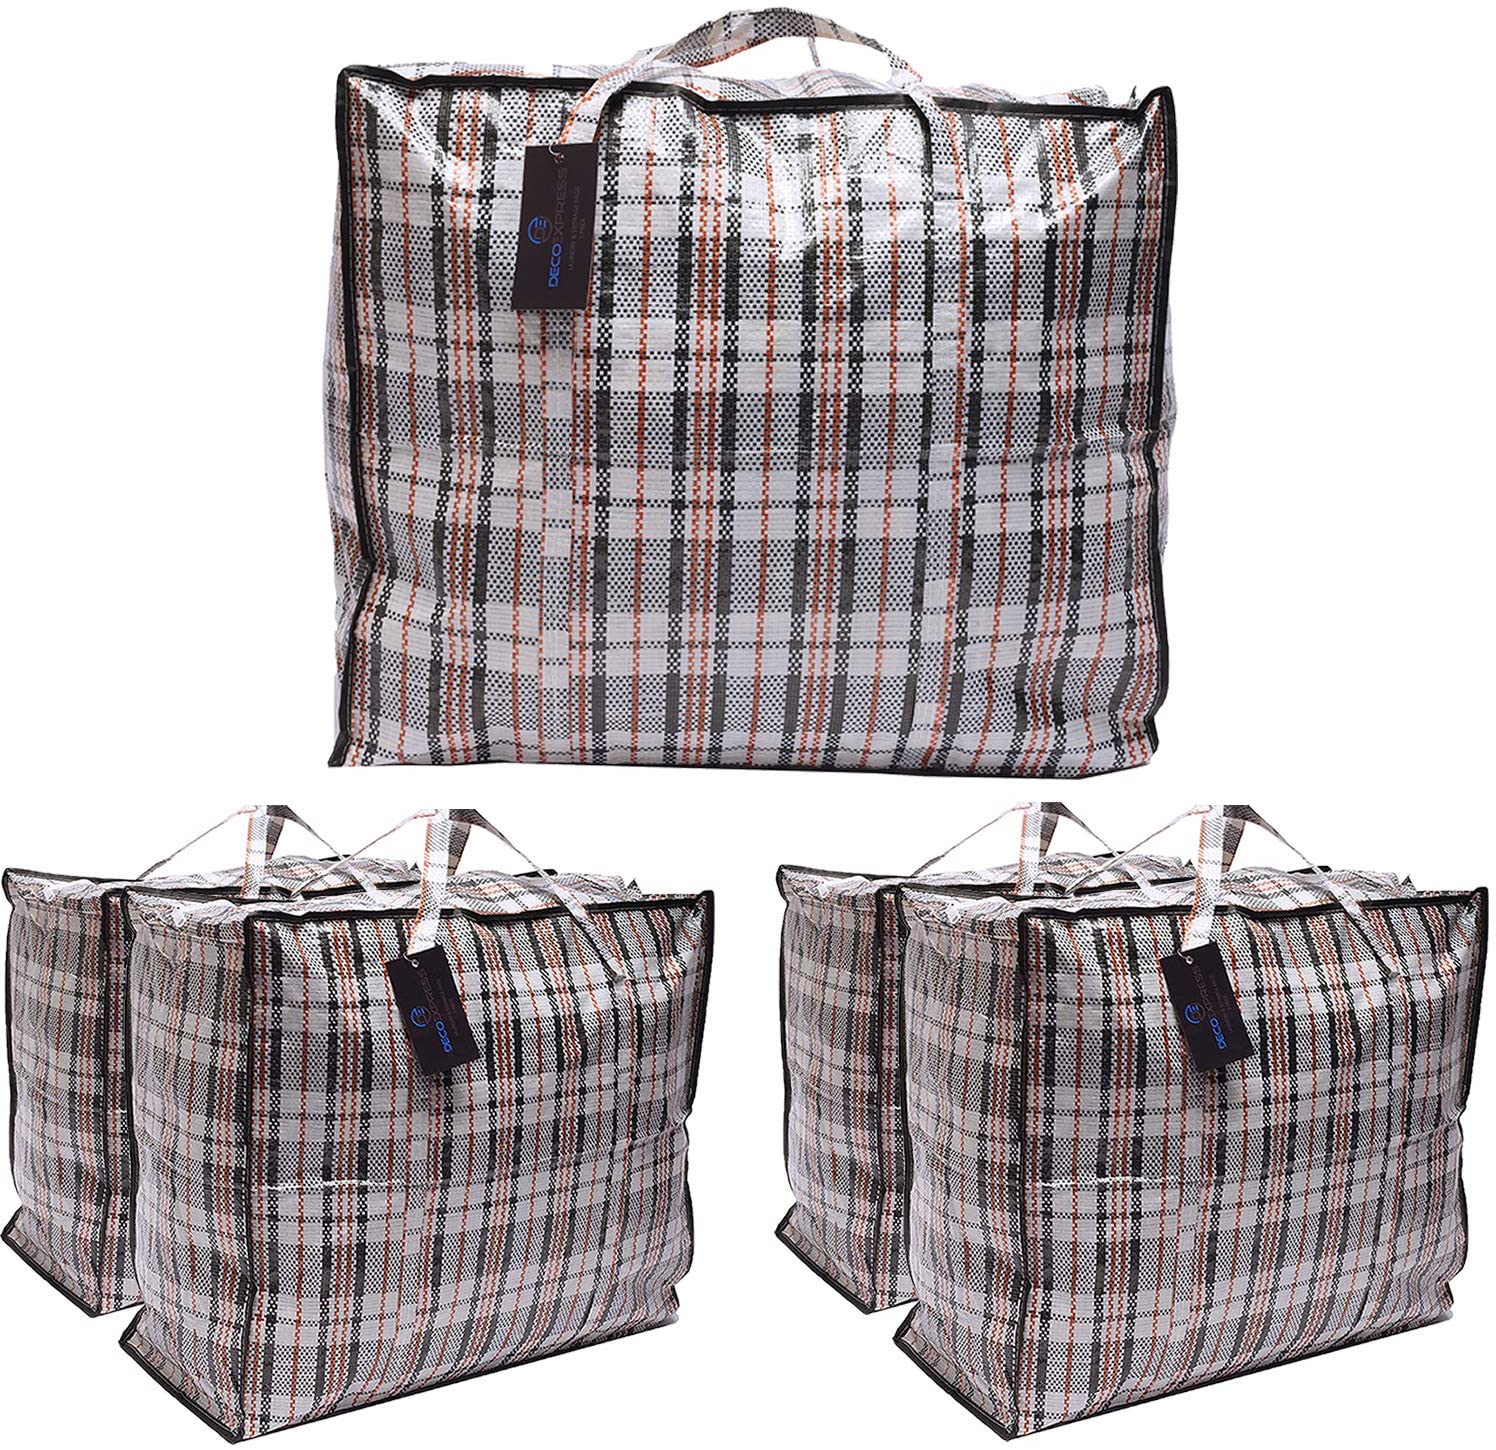 DECO EXPRESS Large Laundry Bags Moving Storage Bag Pack of 5 bags 